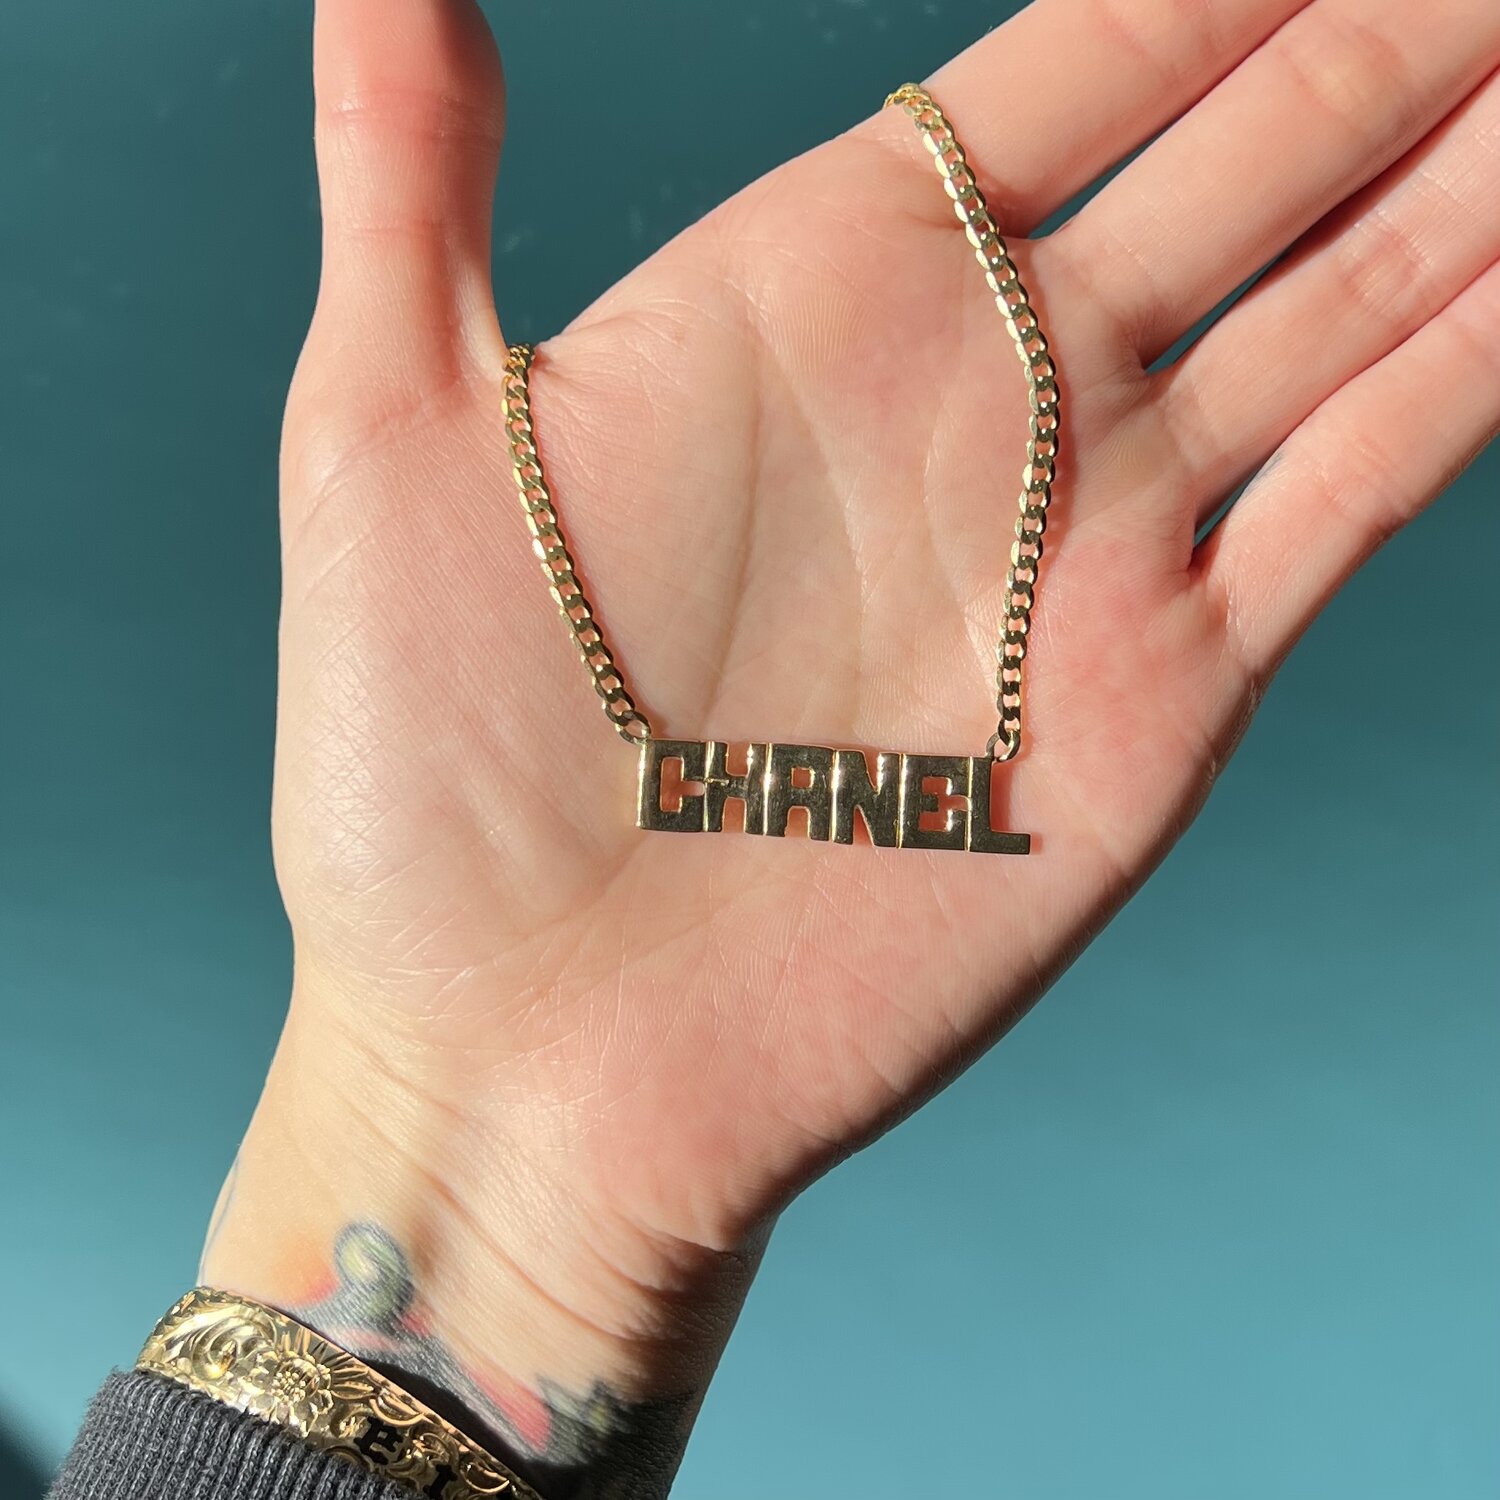 Chanel Name Necklace in 925 Sterling Silver